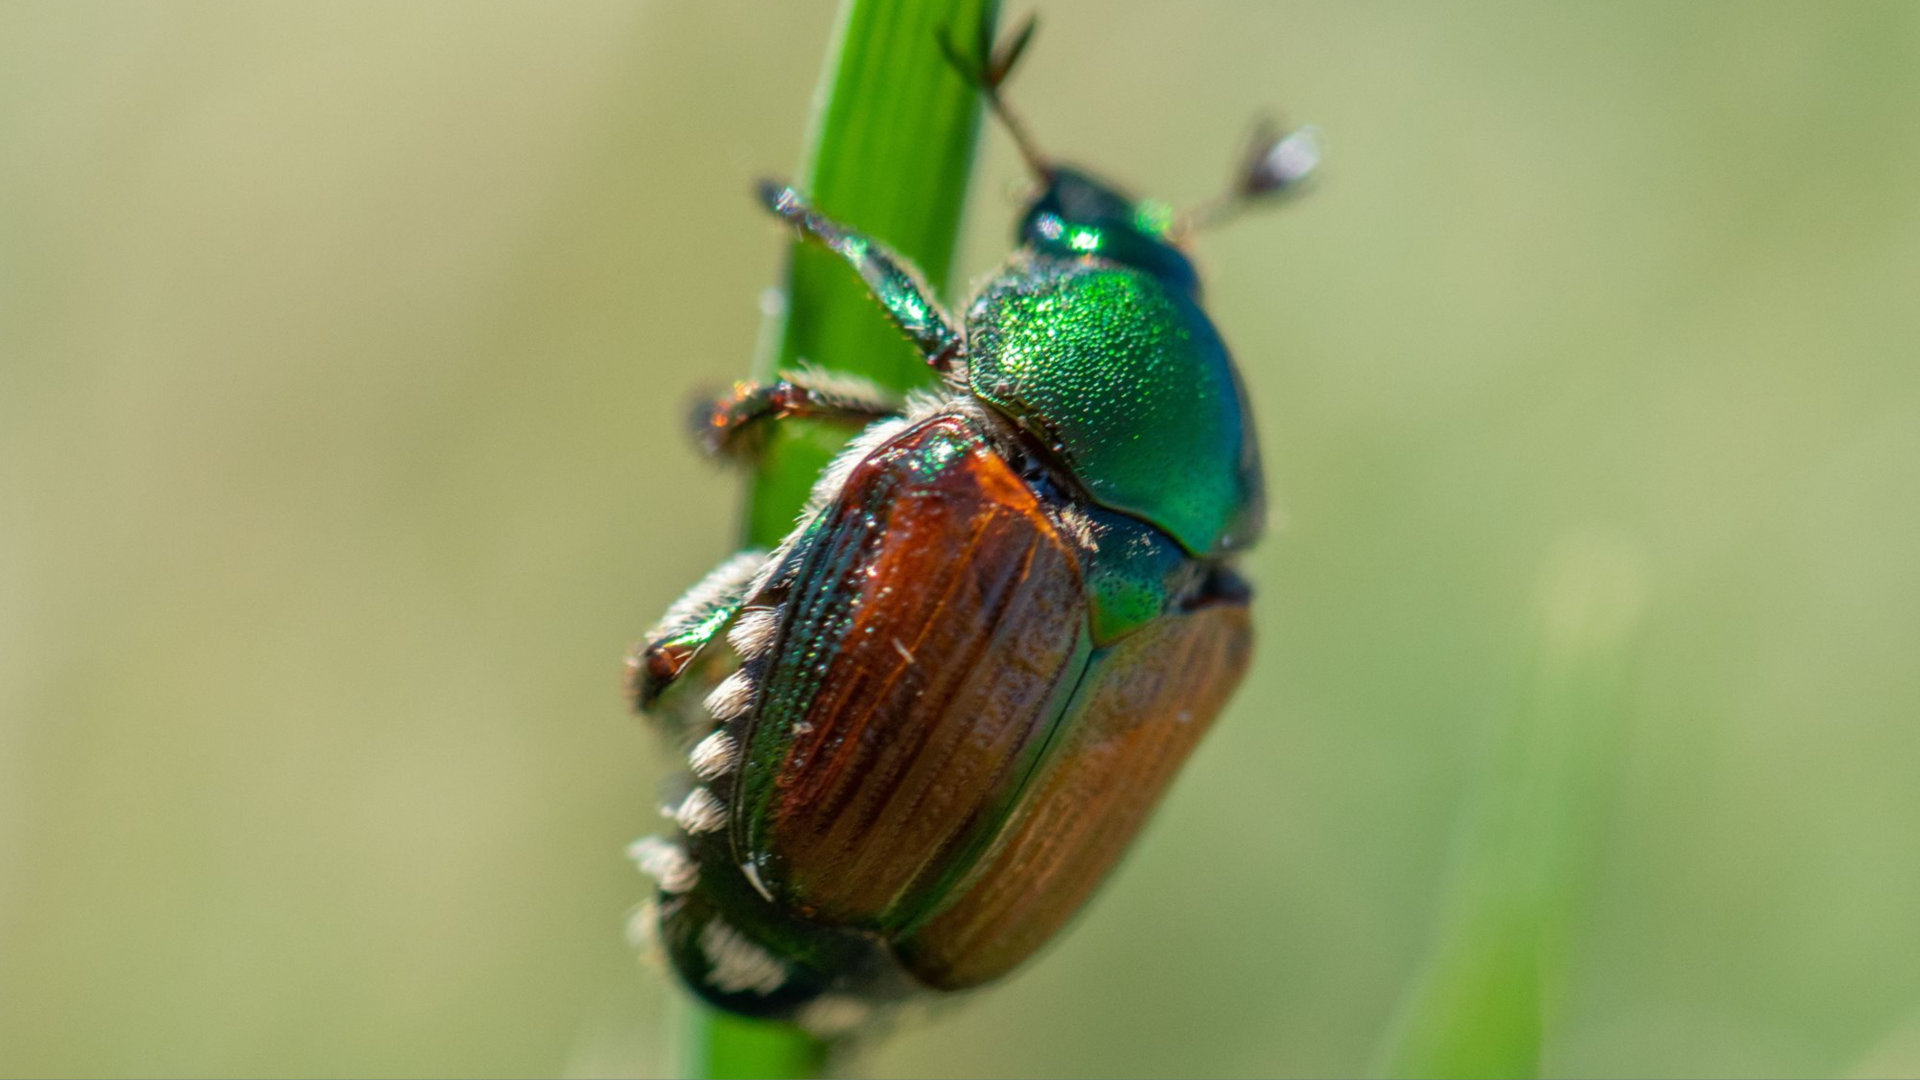 A closeup is shown of a beetle with a green upper body and orangish-red lower body on a green plant.